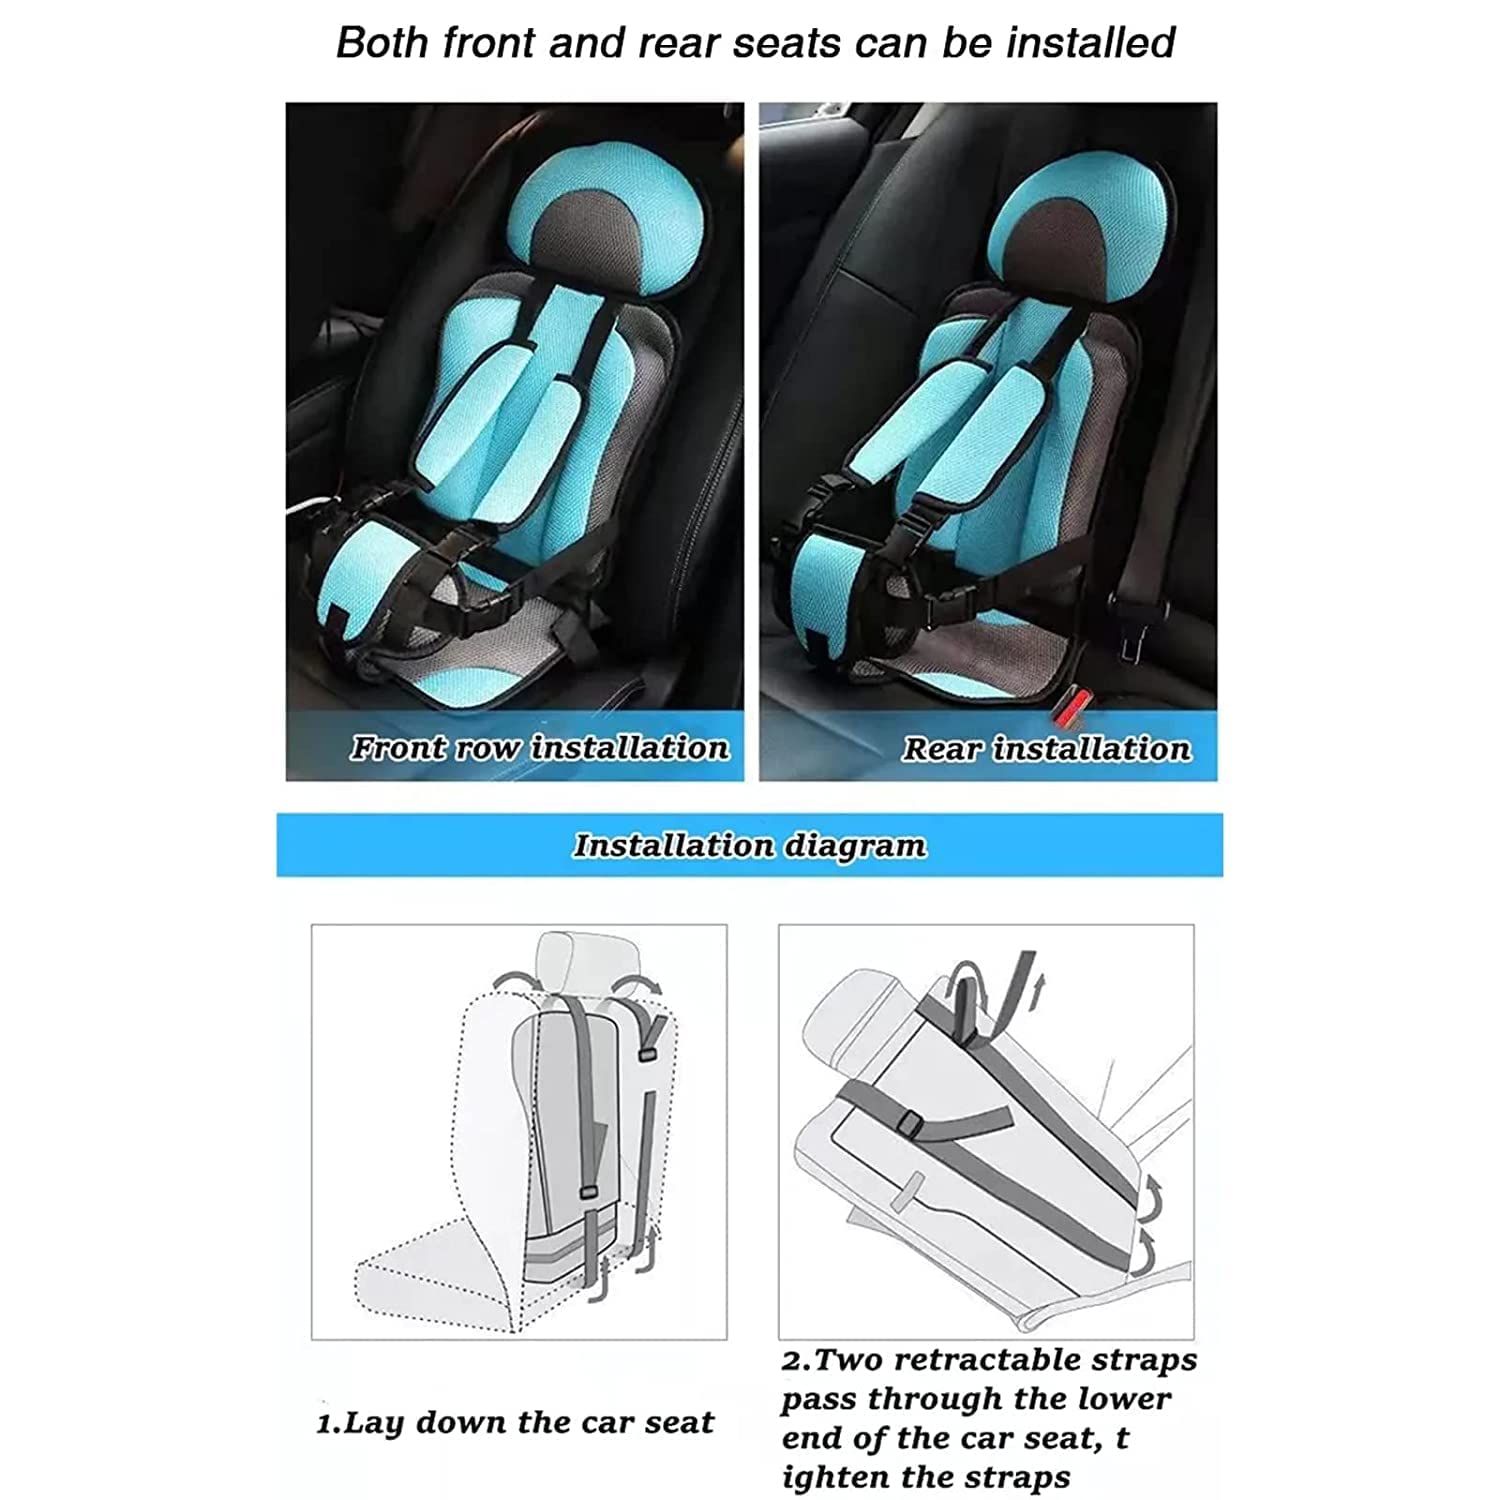 Auto Child Safety Seat Simple Car Portable Seat Belt,Foldable Car Seat Protection Travel Accessories for Kids 0-12,Car Seat Liner for Infant (Black, Big(22.1 * 13.4 * 9.5in))